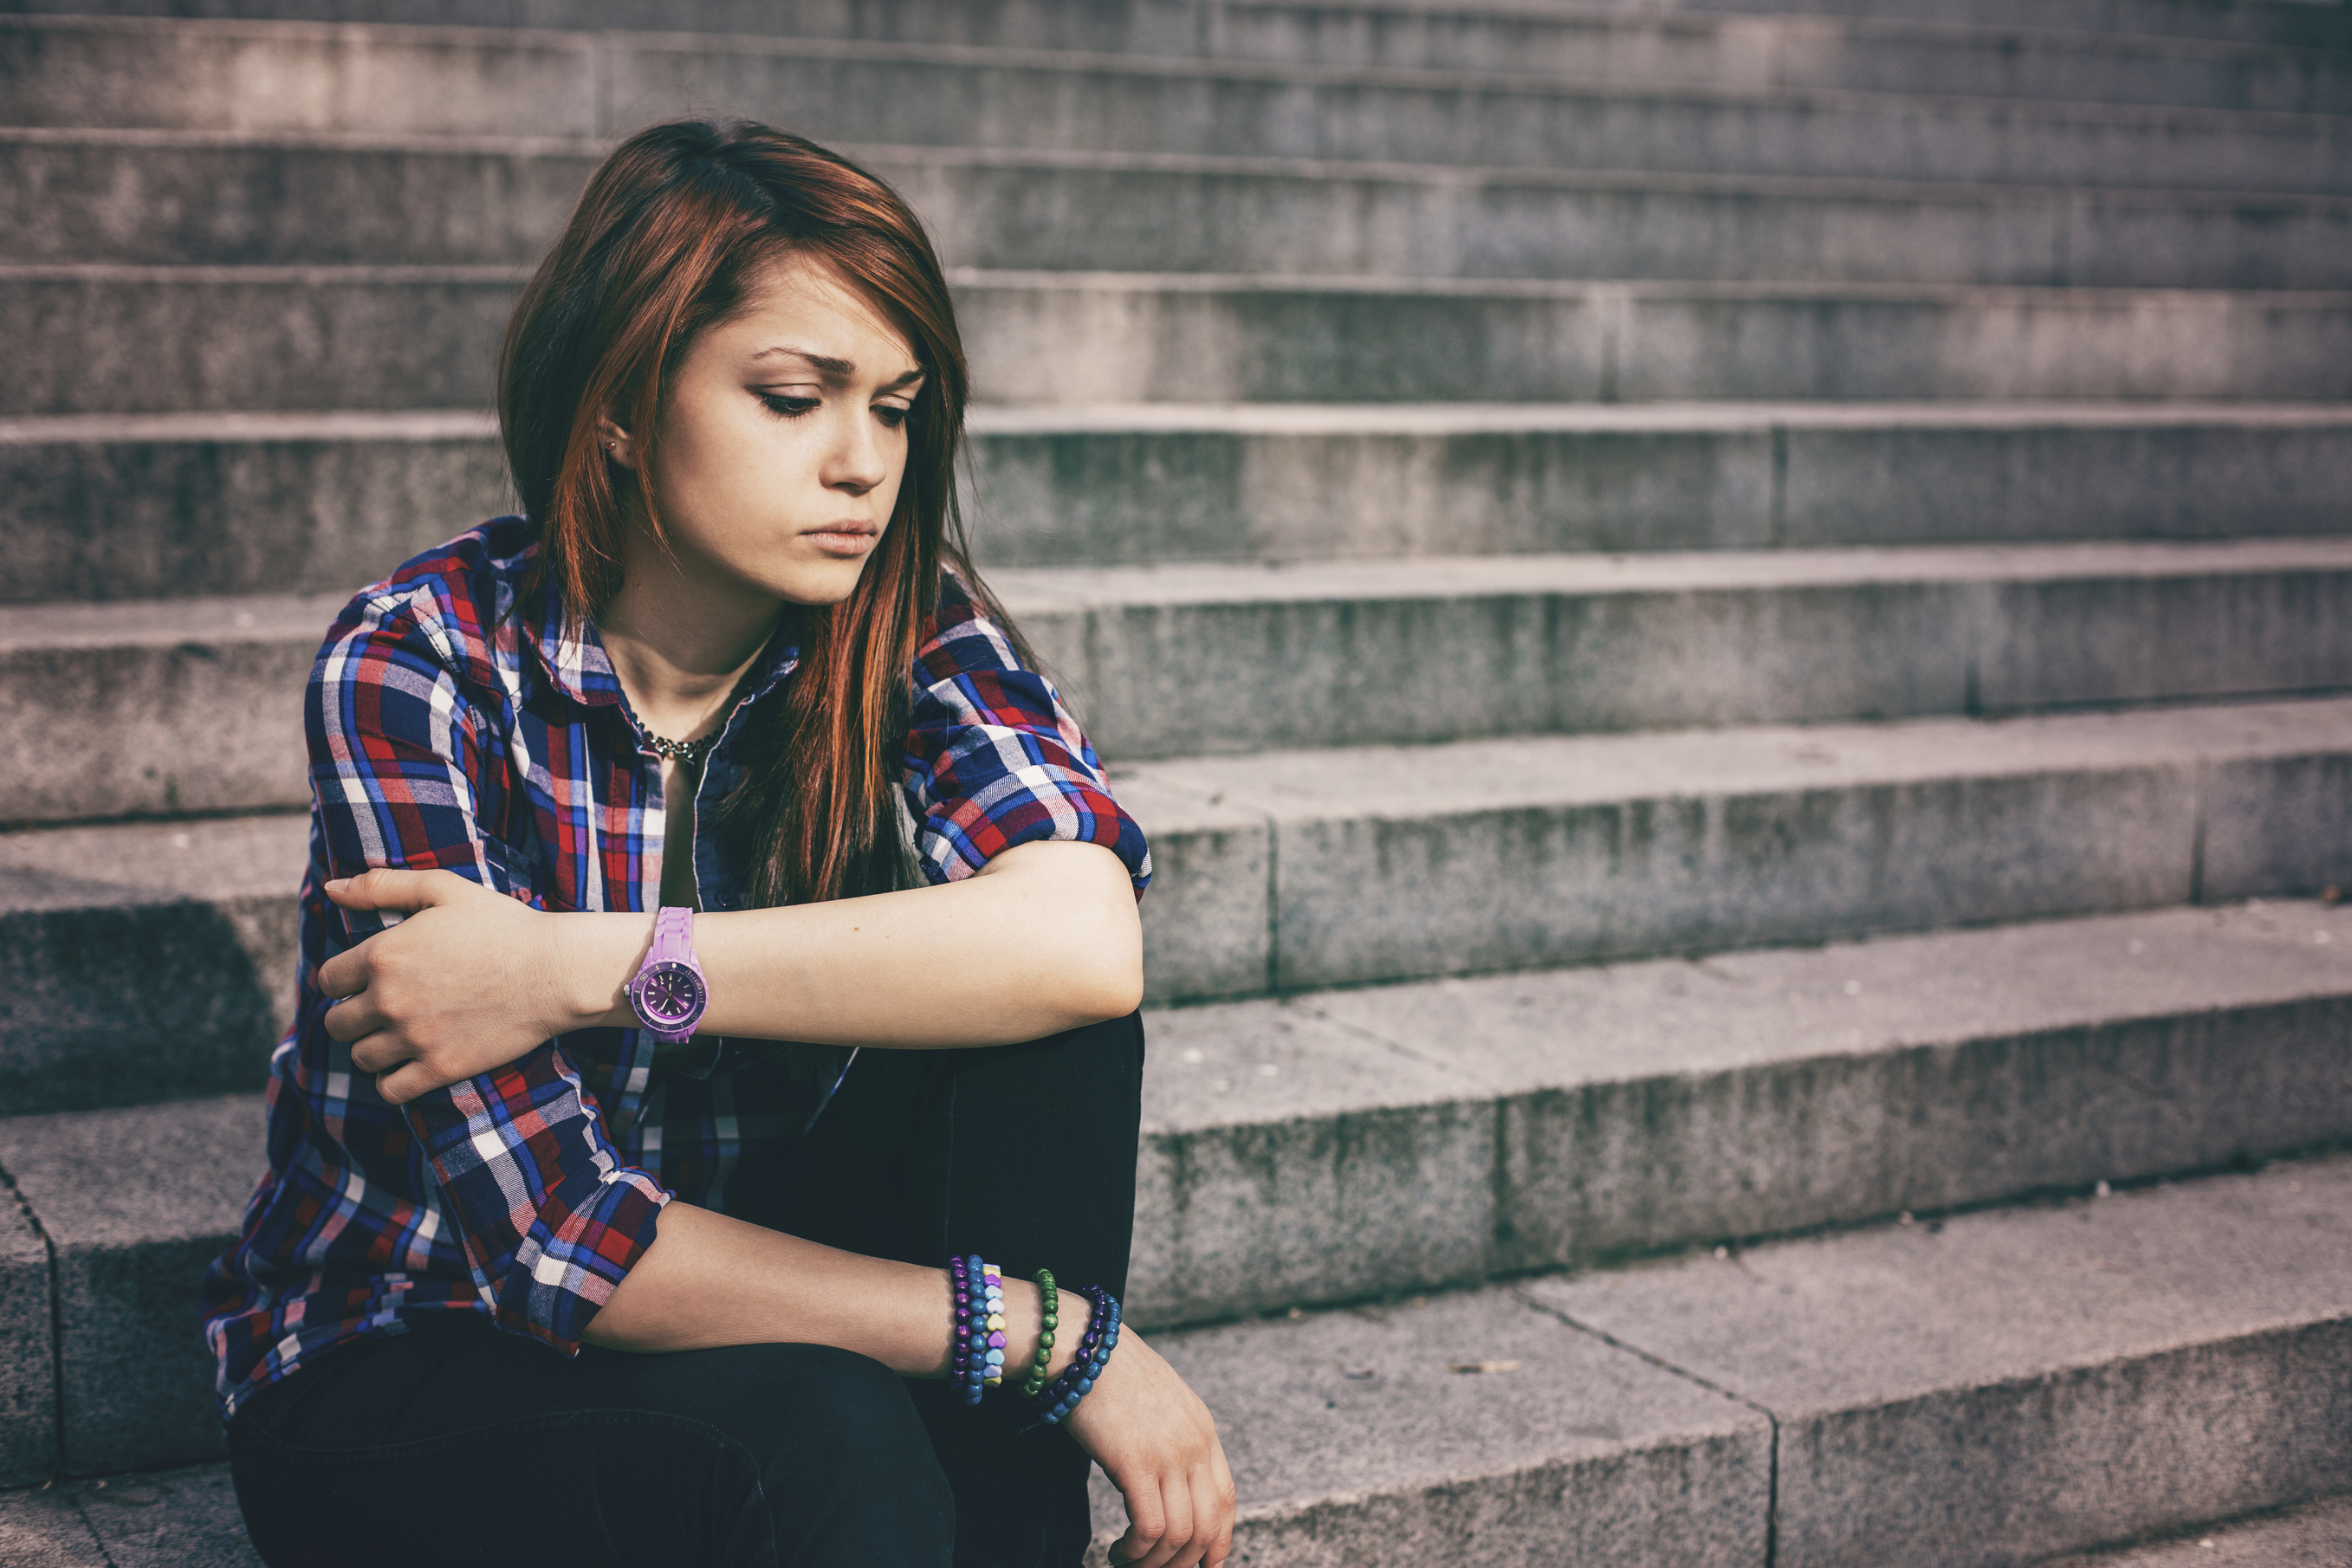 Wounds From Childhood Bullying Persist Into Young Adulthood